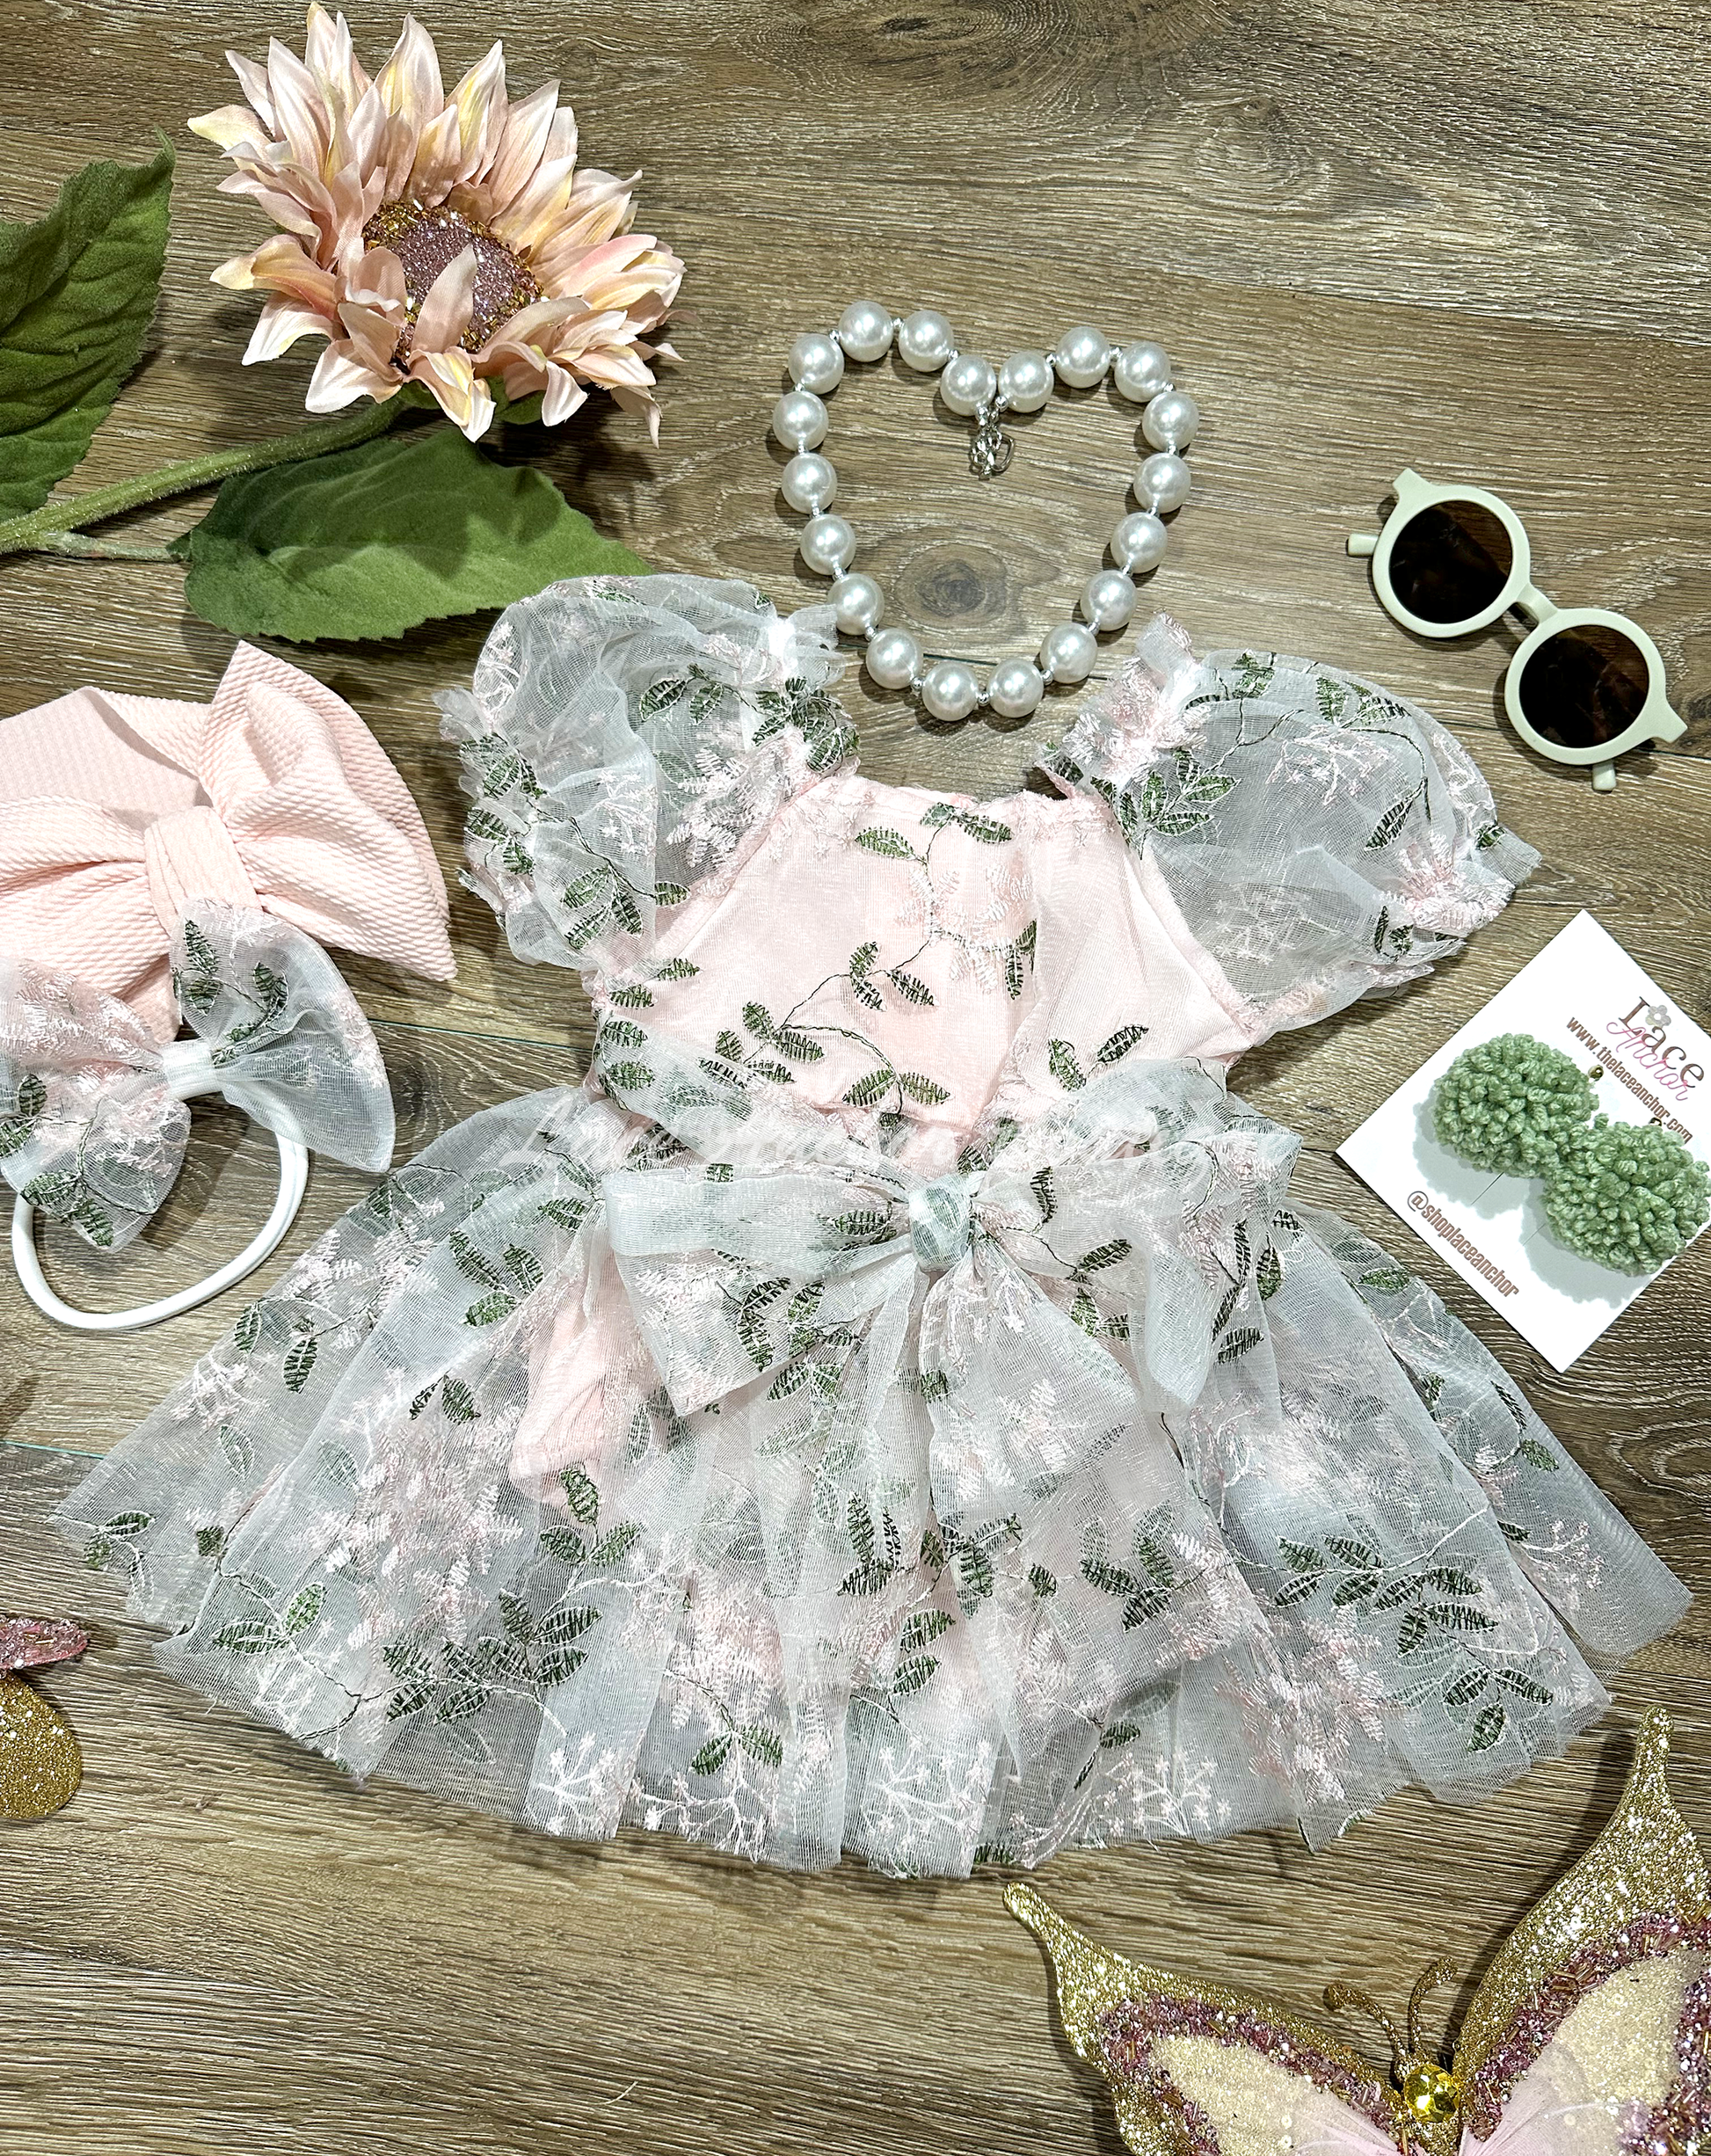 light blush pink embroidered floral rint skirted baby girls romper with large tied bow on front and puffed short sleeves. Baby toddler flower girl dress.